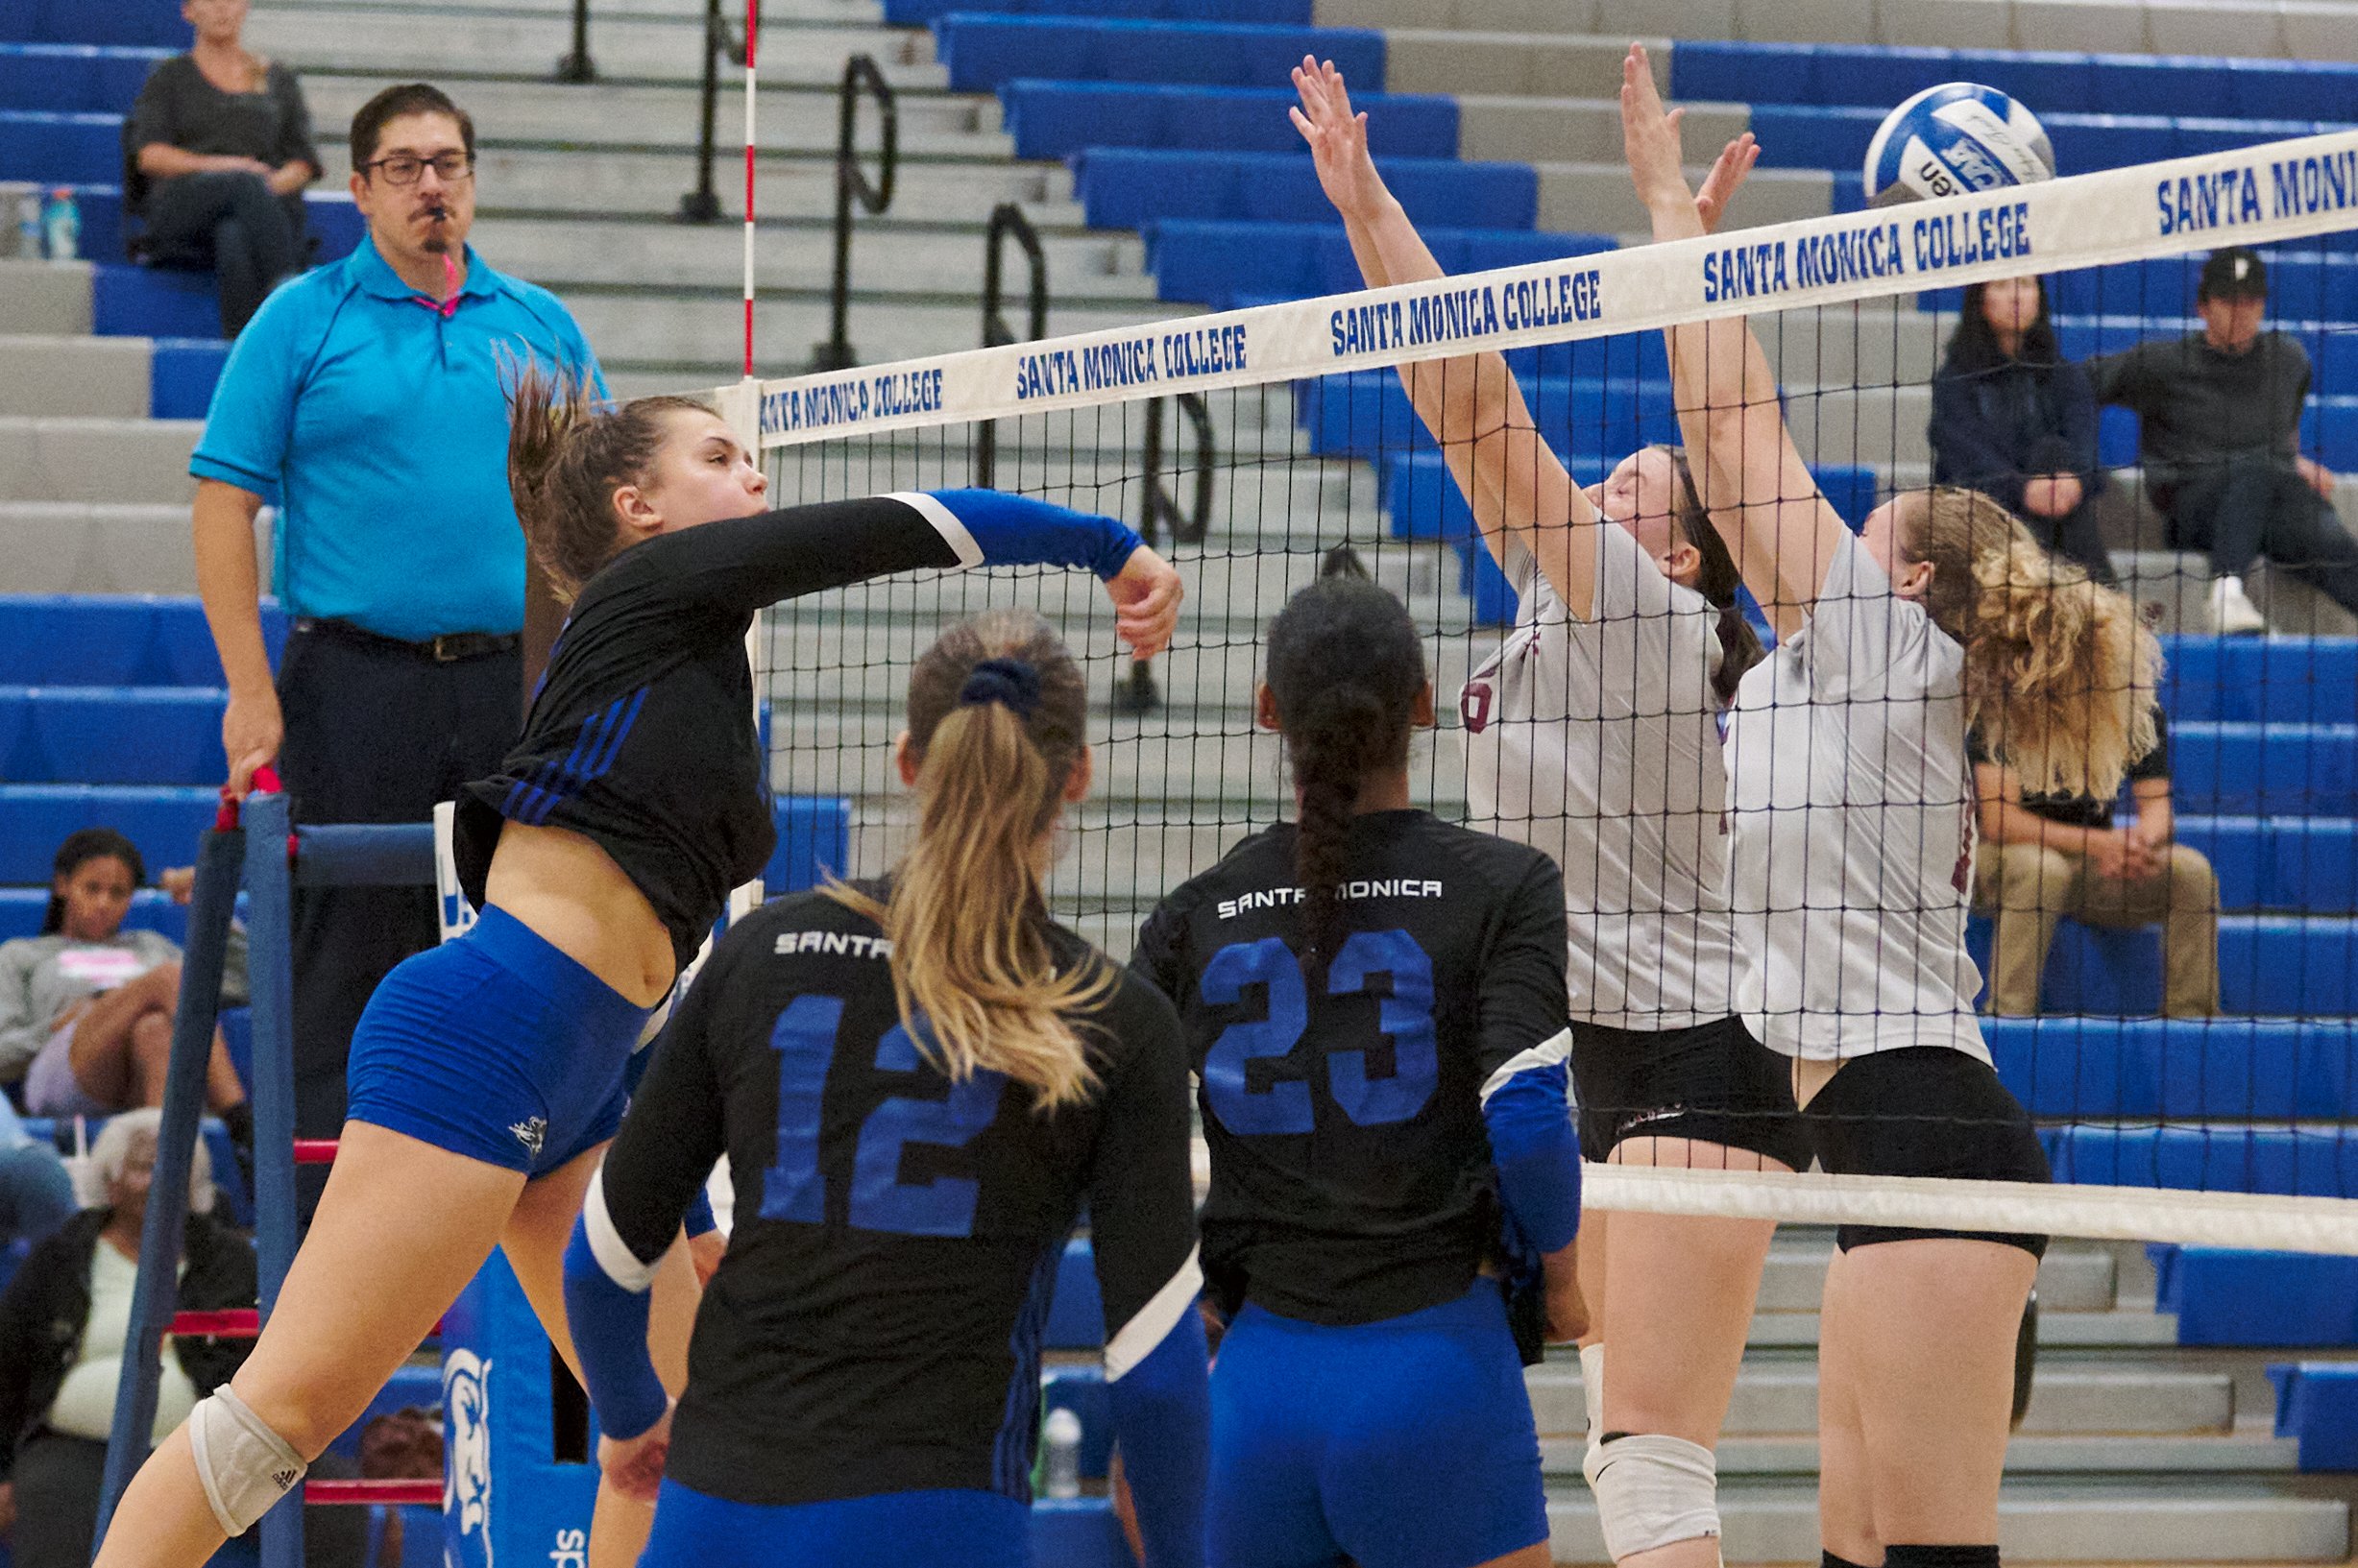  Santa Monica College Corsairs' Mackenzie Wolff hits the ball past the defense of Antelope Valley College Marauders' Ella Gawallek and Sabre Jensen during the women's volleyball match on Wednesday, Oct. 12, 2022, at the Corsair Gym in Santa Monica, C